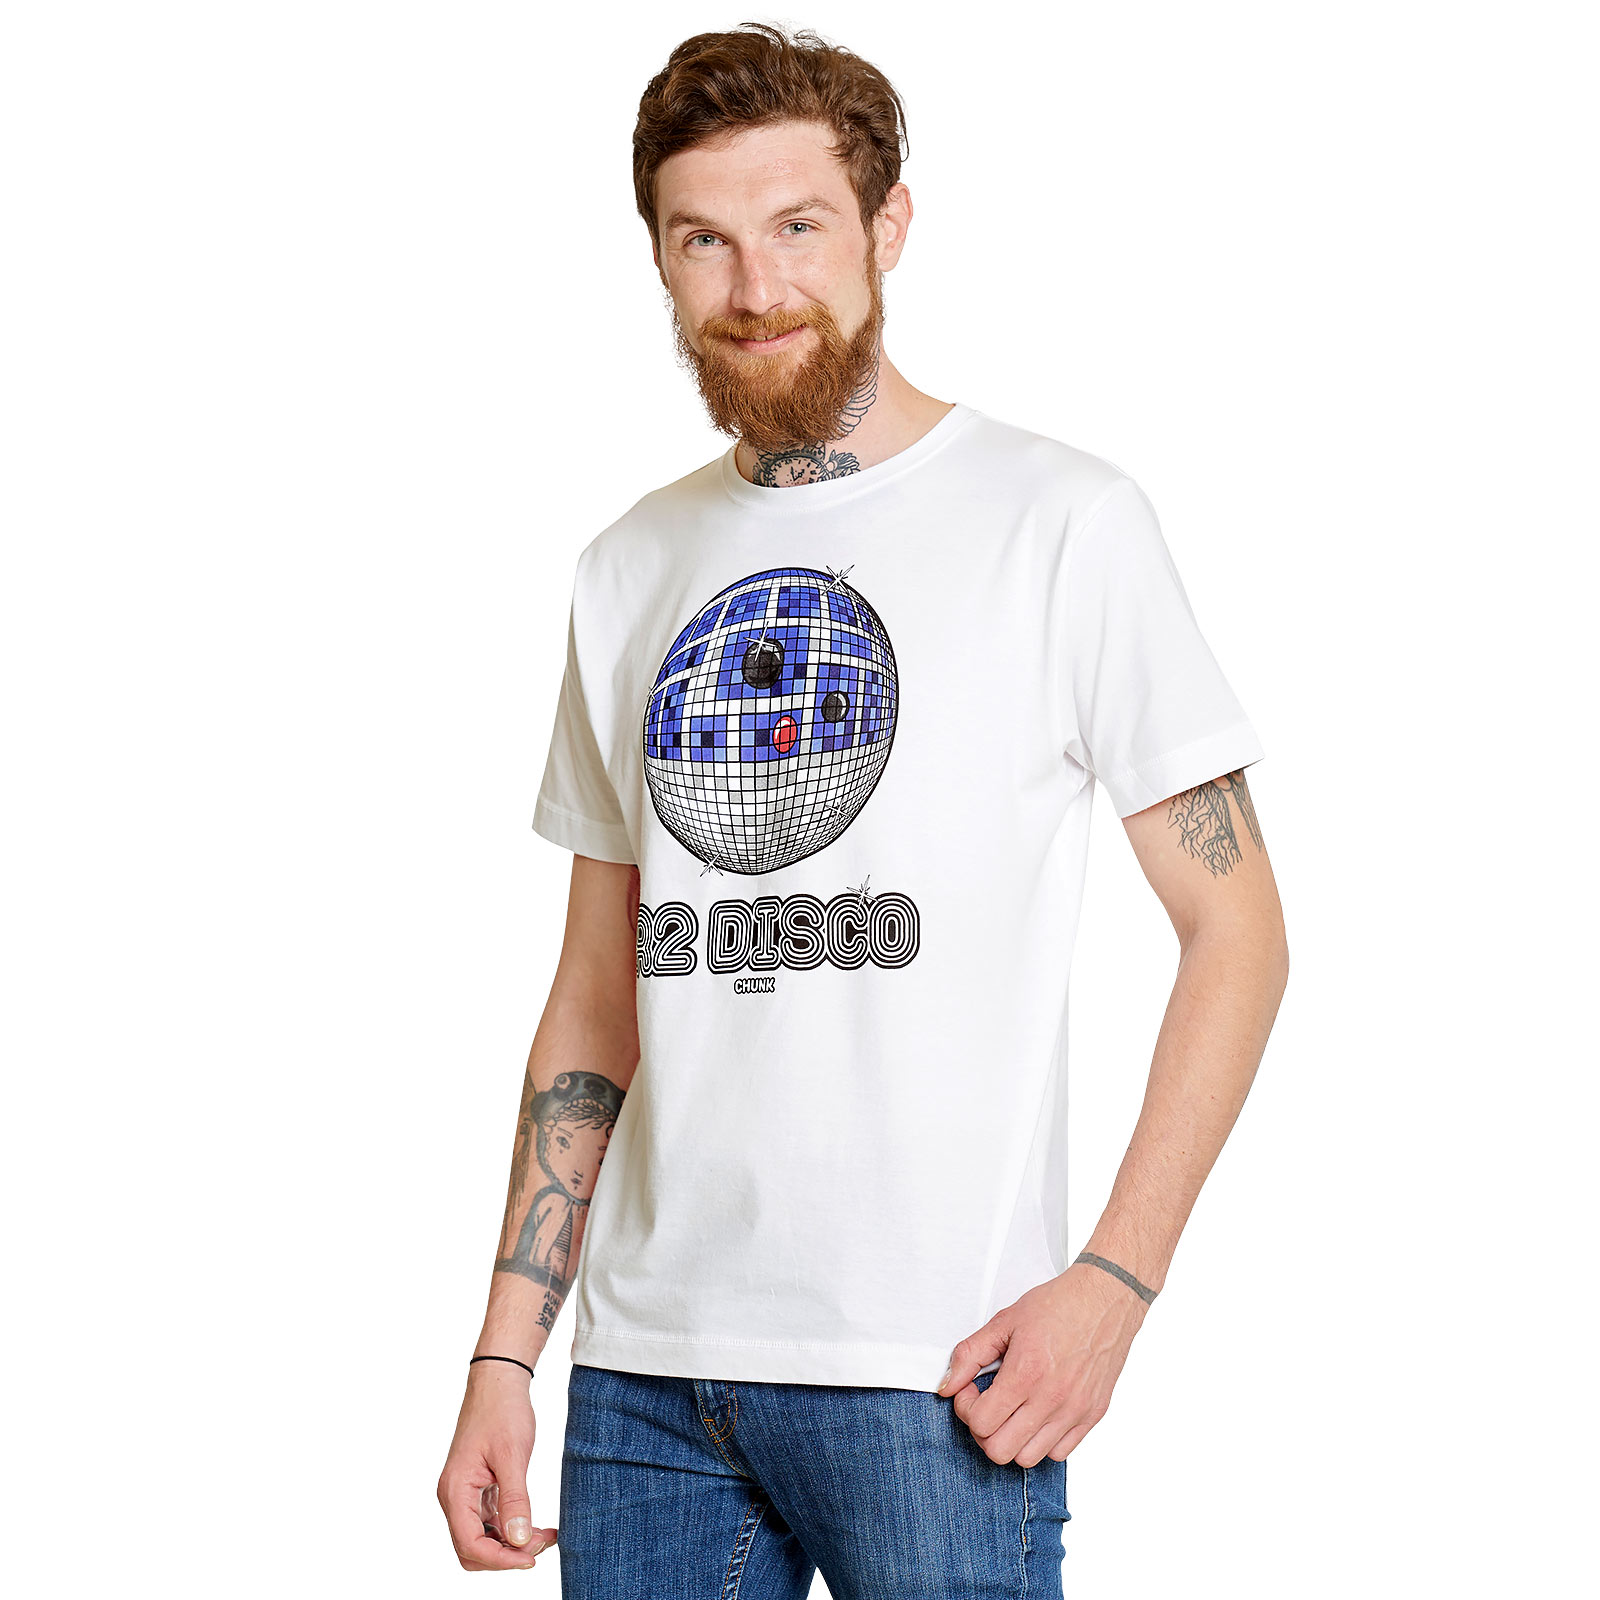 Droid Disco T-Shirt for Star Wars Fans white